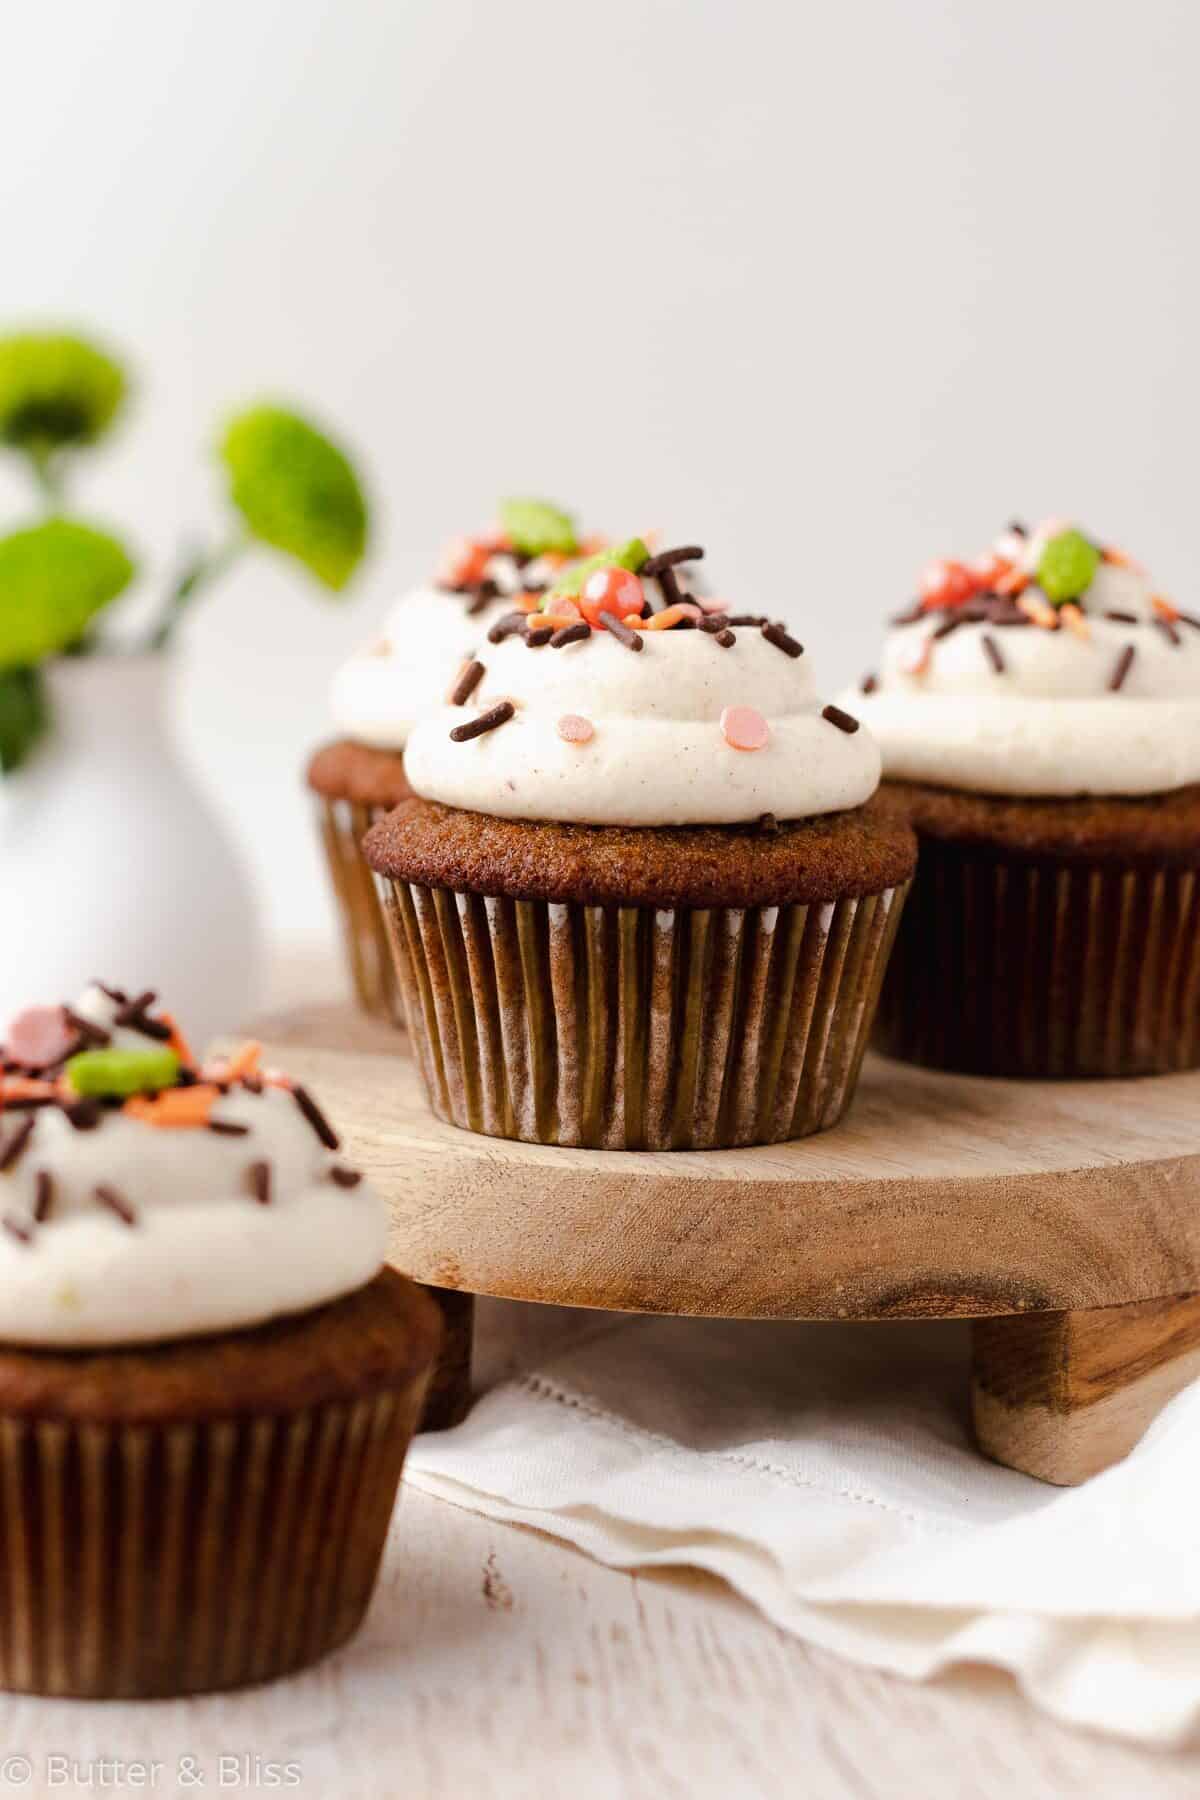 Small batch of spice cupcakes arranged on a wooden platter